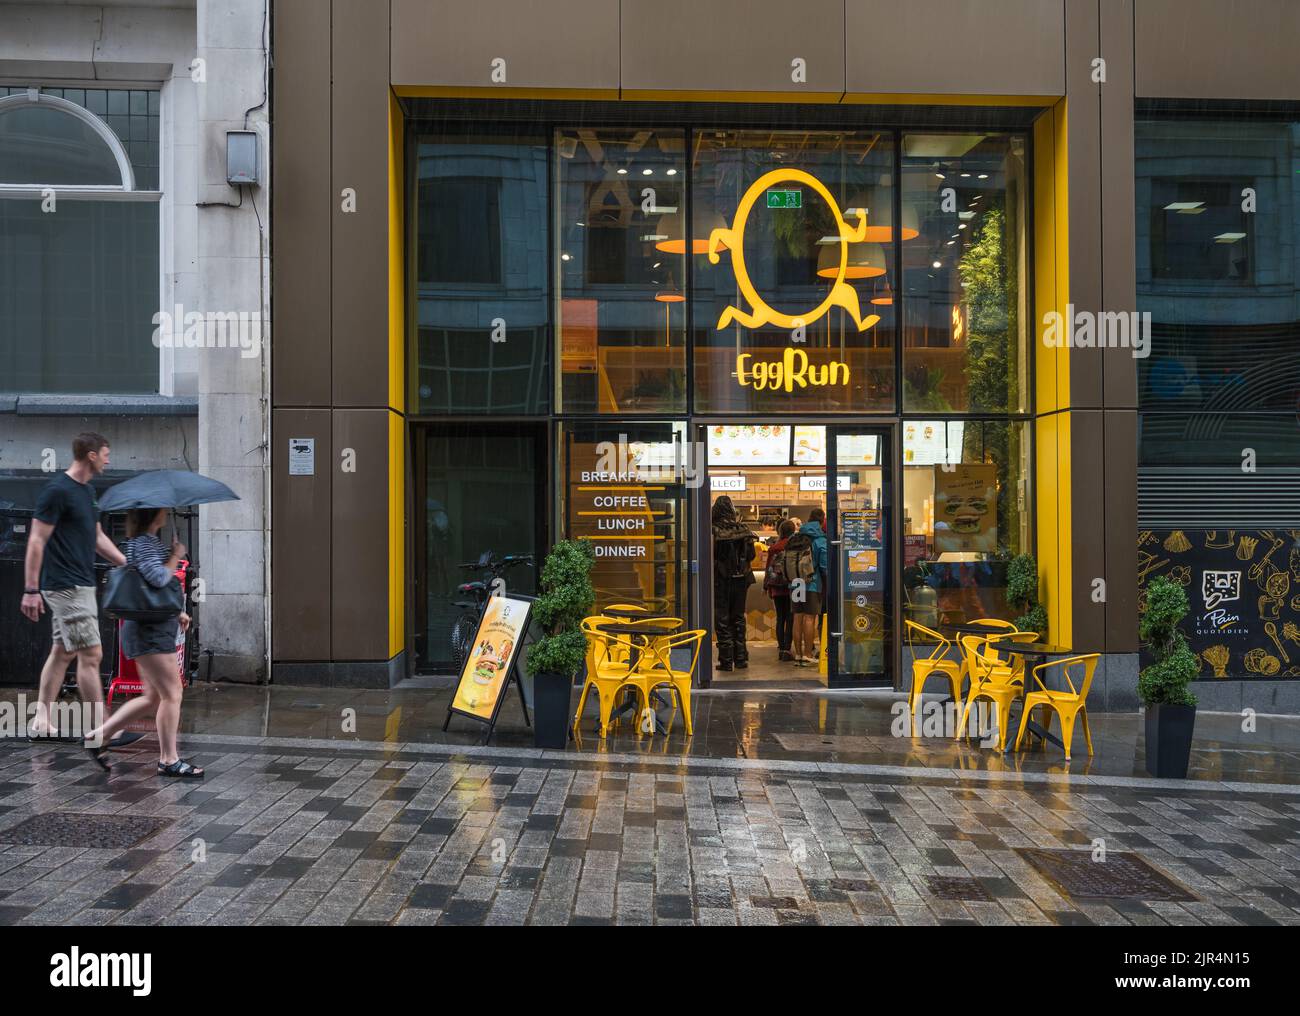 EggRun, a restaurant and takeaway on Fish Street Hill, providing egg based meals and sandwiches. City of London, England, UK Stock Photo